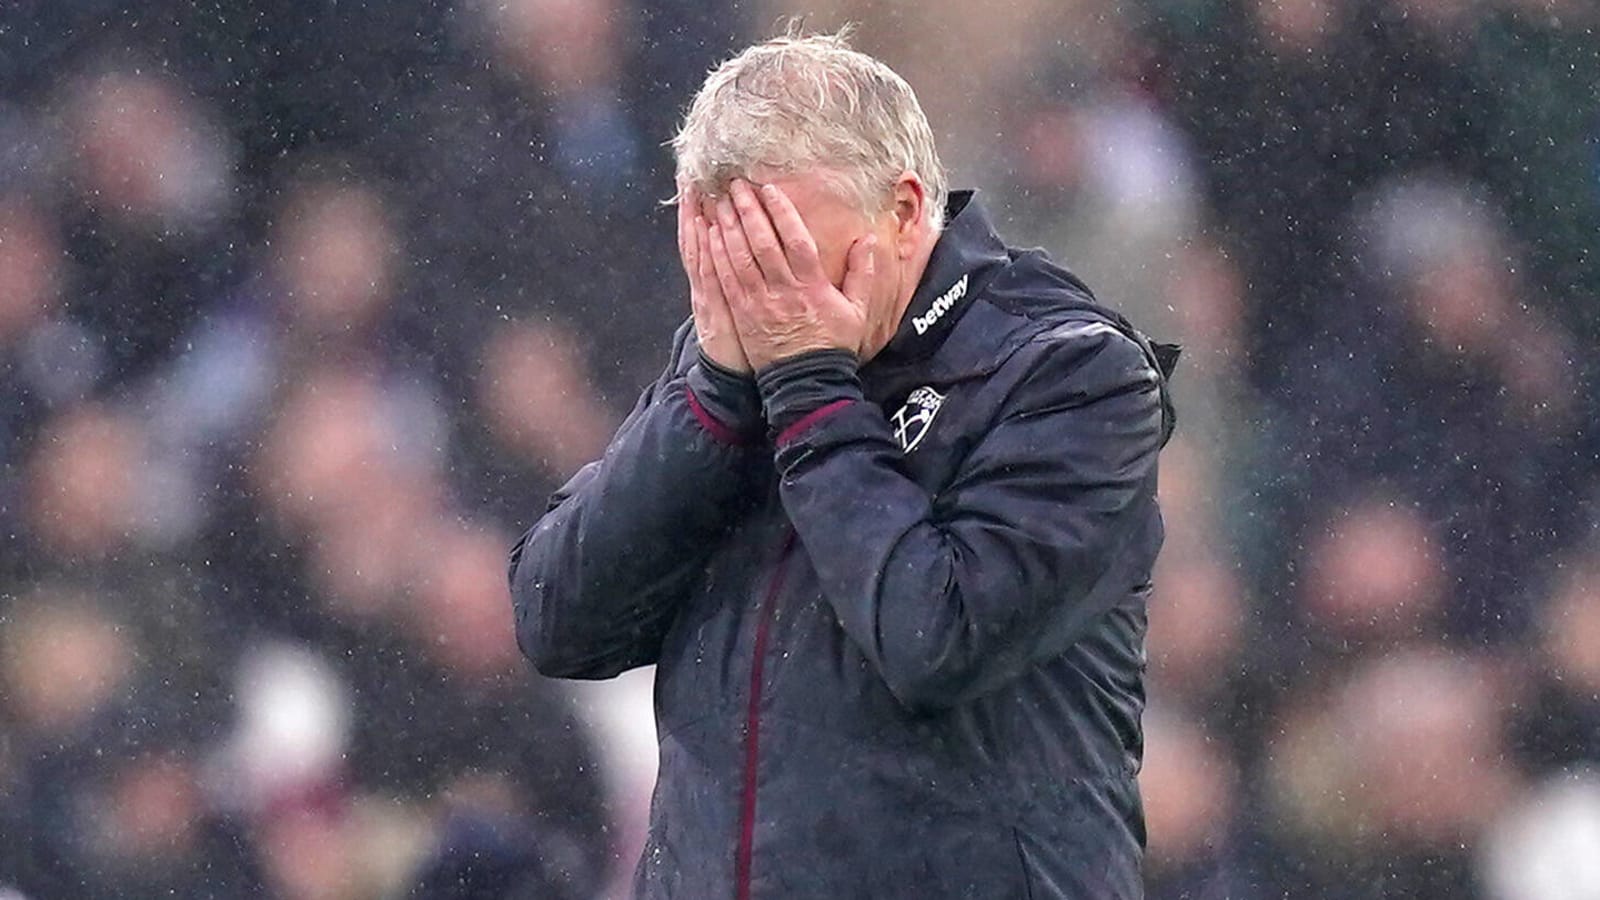 David Moyes destroys officiating in West Ham’s draw with Burnley